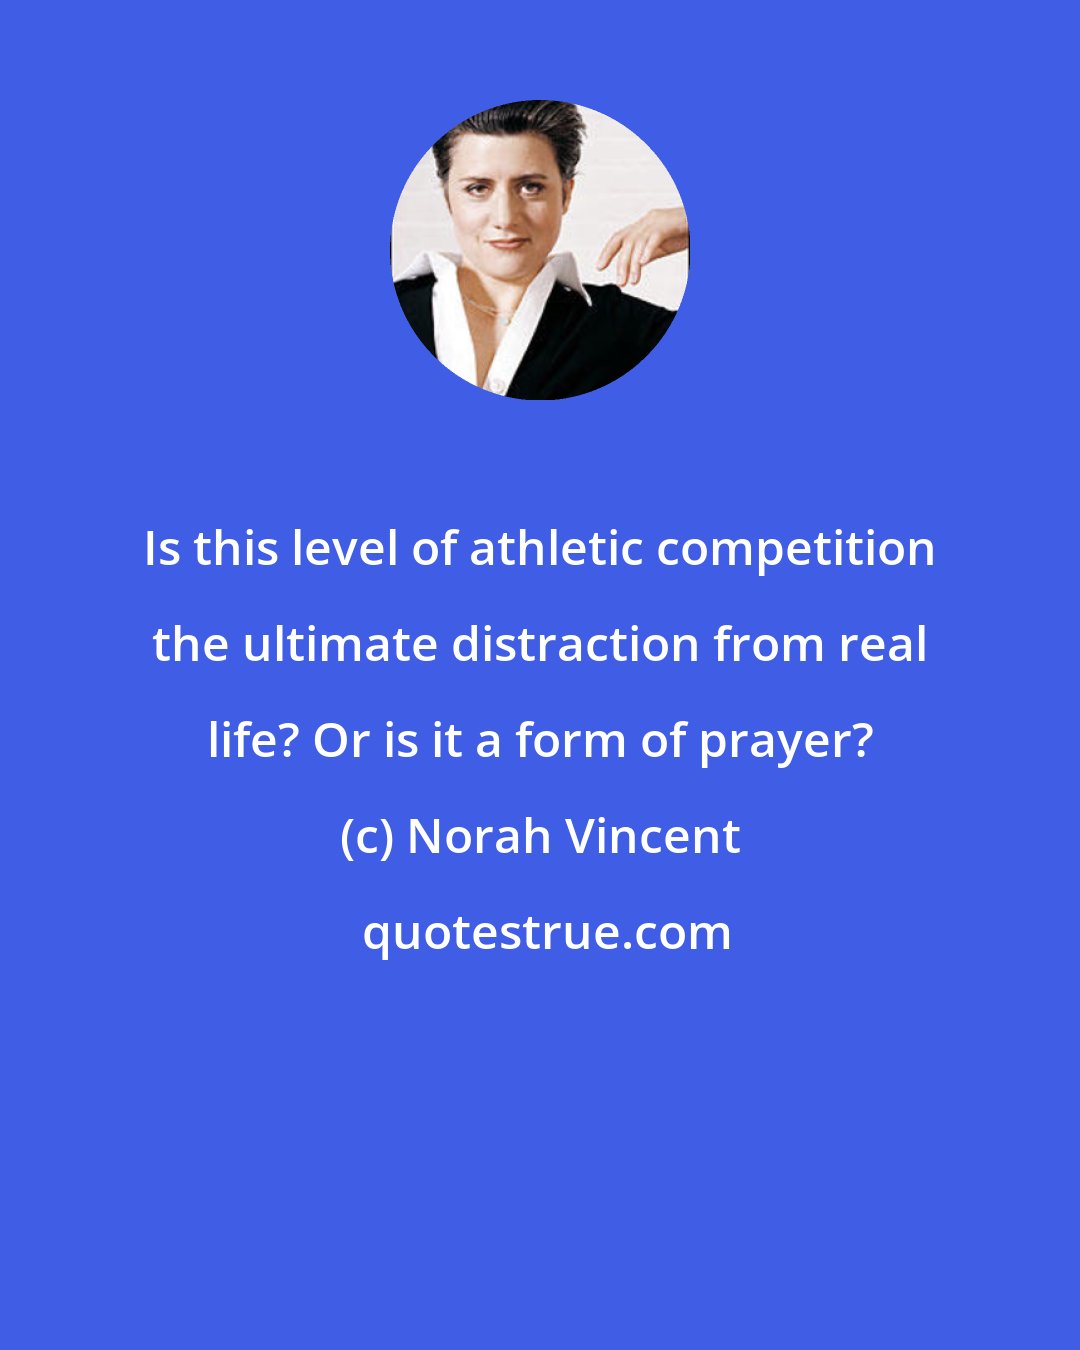 Norah Vincent: Is this level of athletic competition the ultimate distraction from real life? Or is it a form of prayer?